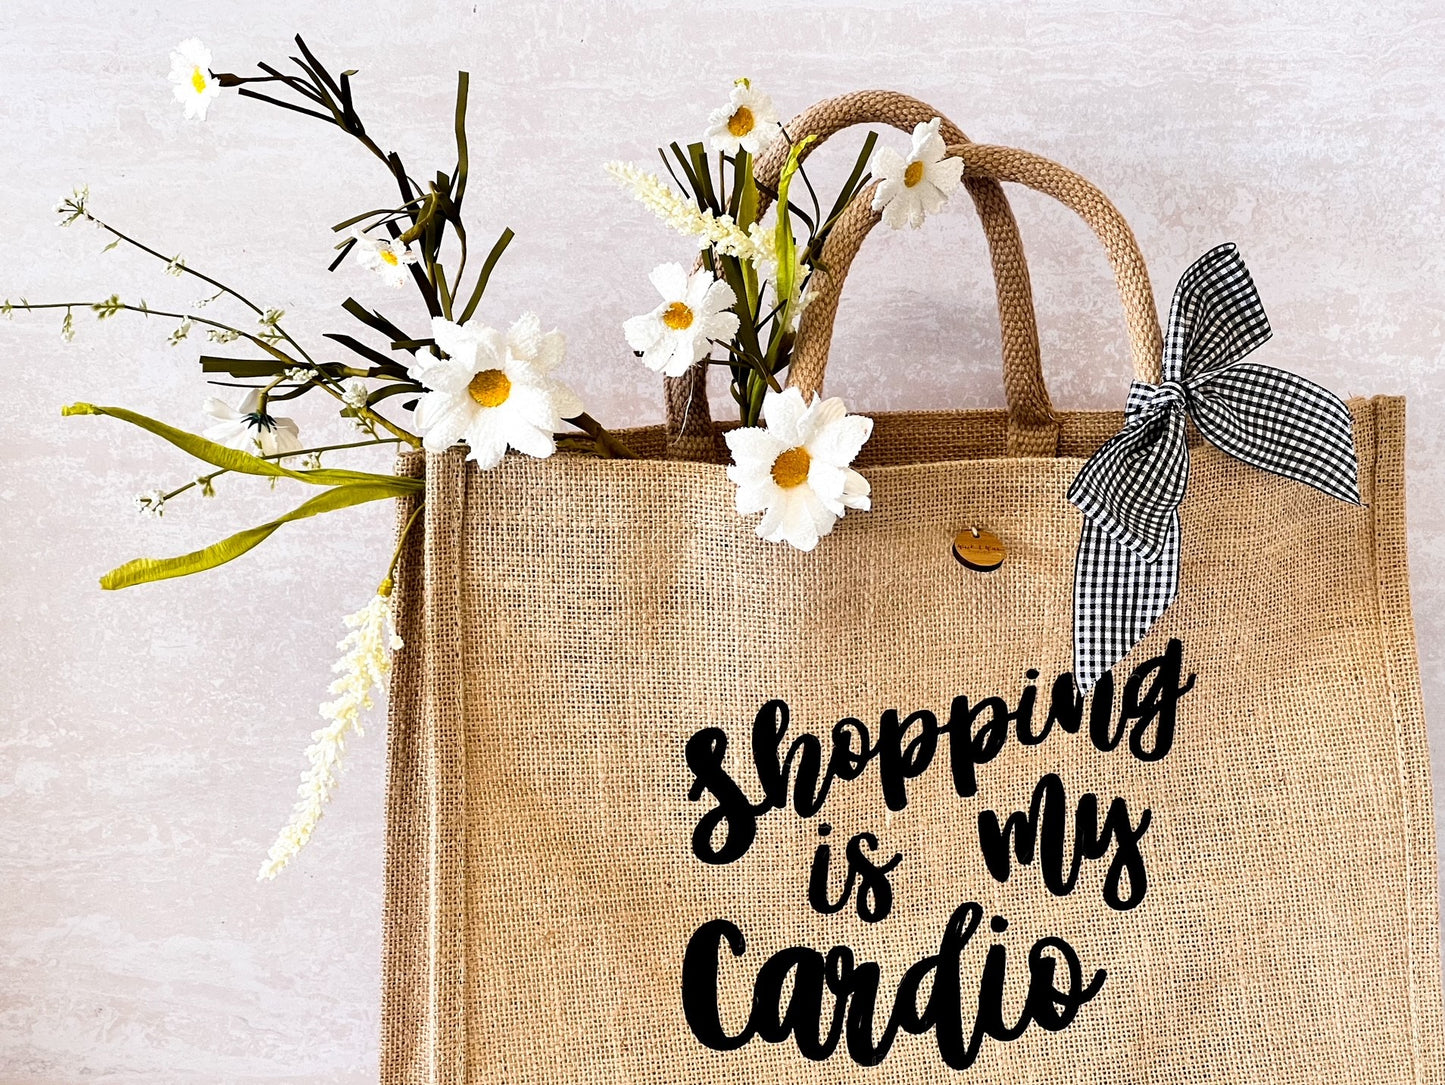 "Shopping is my Cardio" Tote Bag